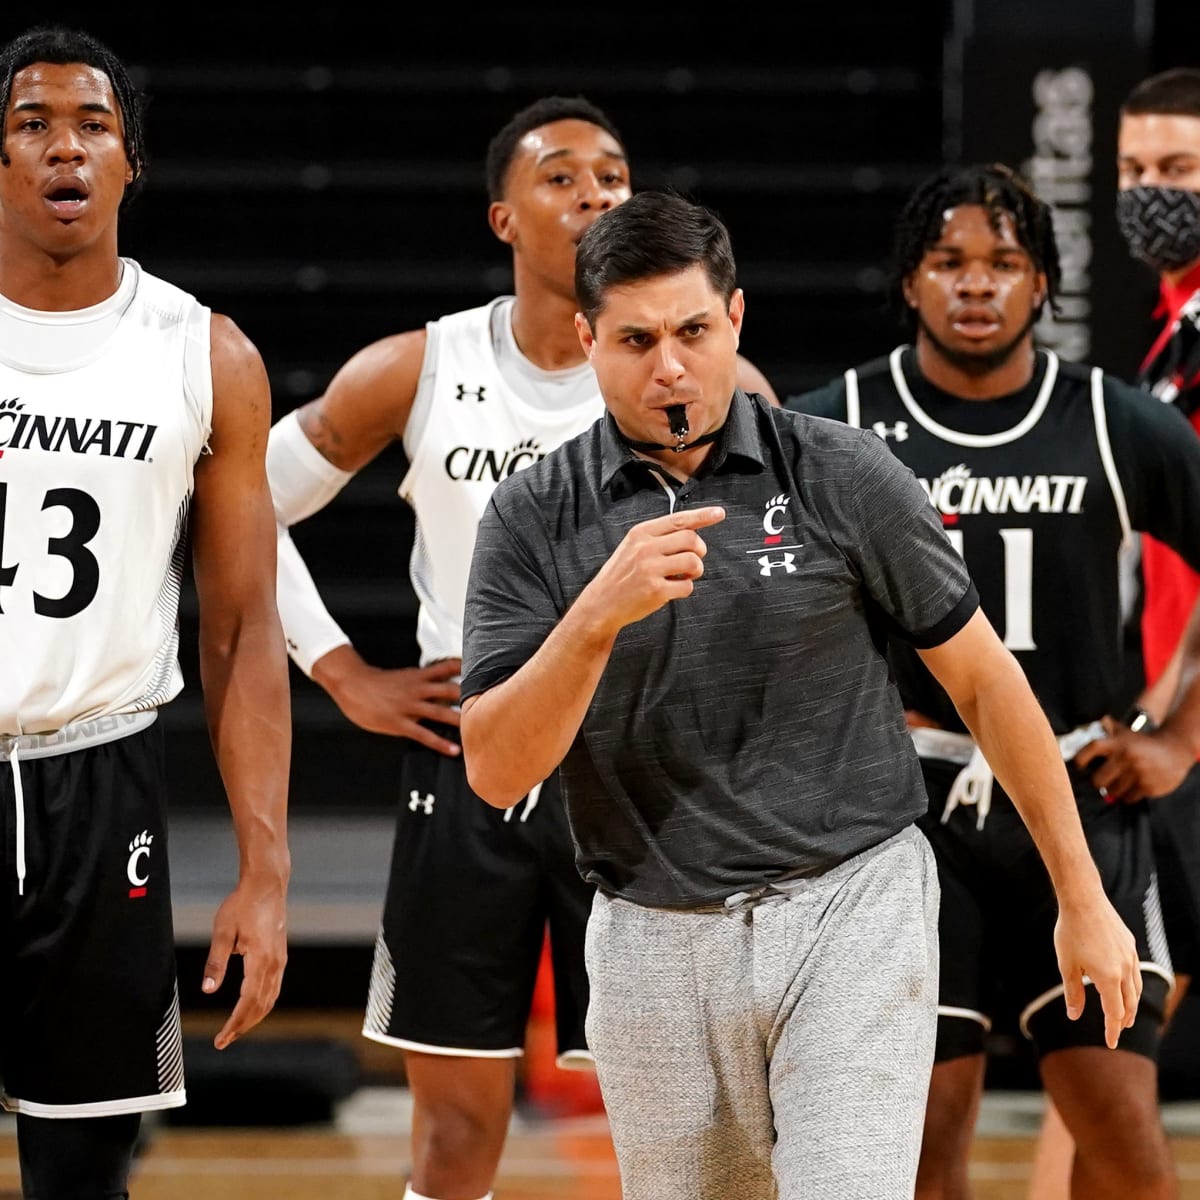 Wes Miller: “The standard at Cincinnati is you play in the NCAA Tournament”